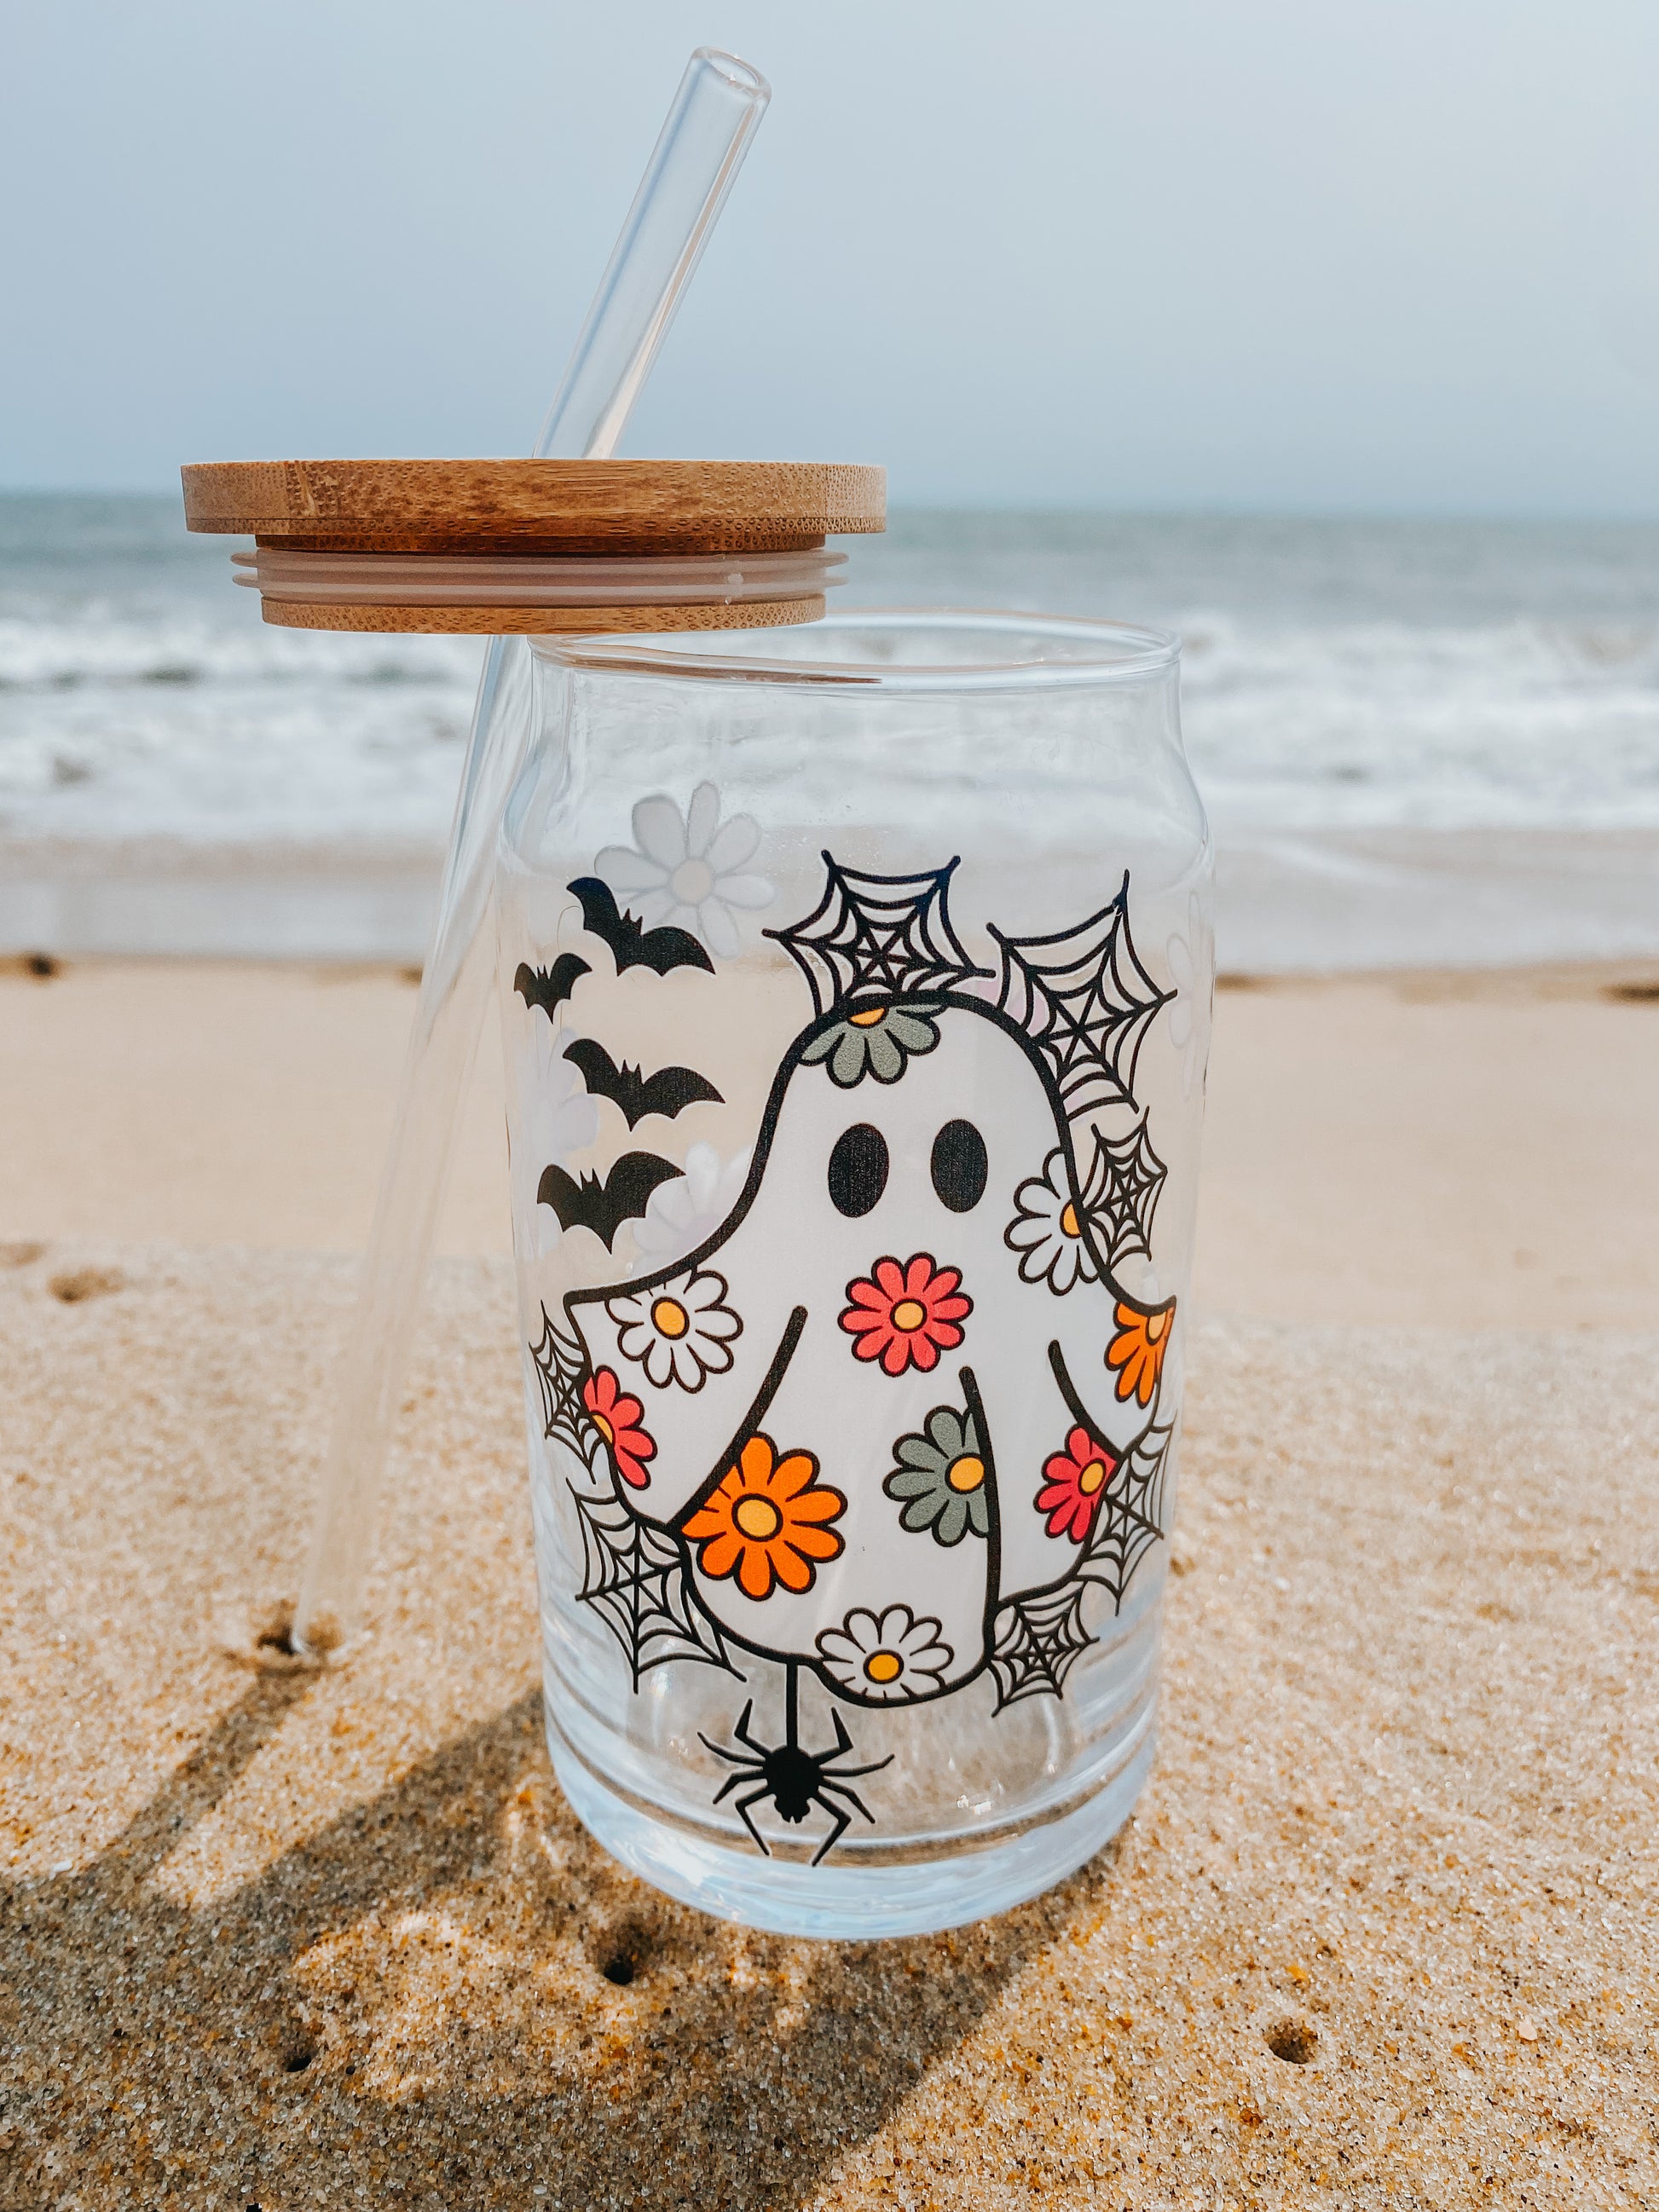 Groovy Halloween 16 Oz. Glass Cup with Bamboo Lid + Glass Straw